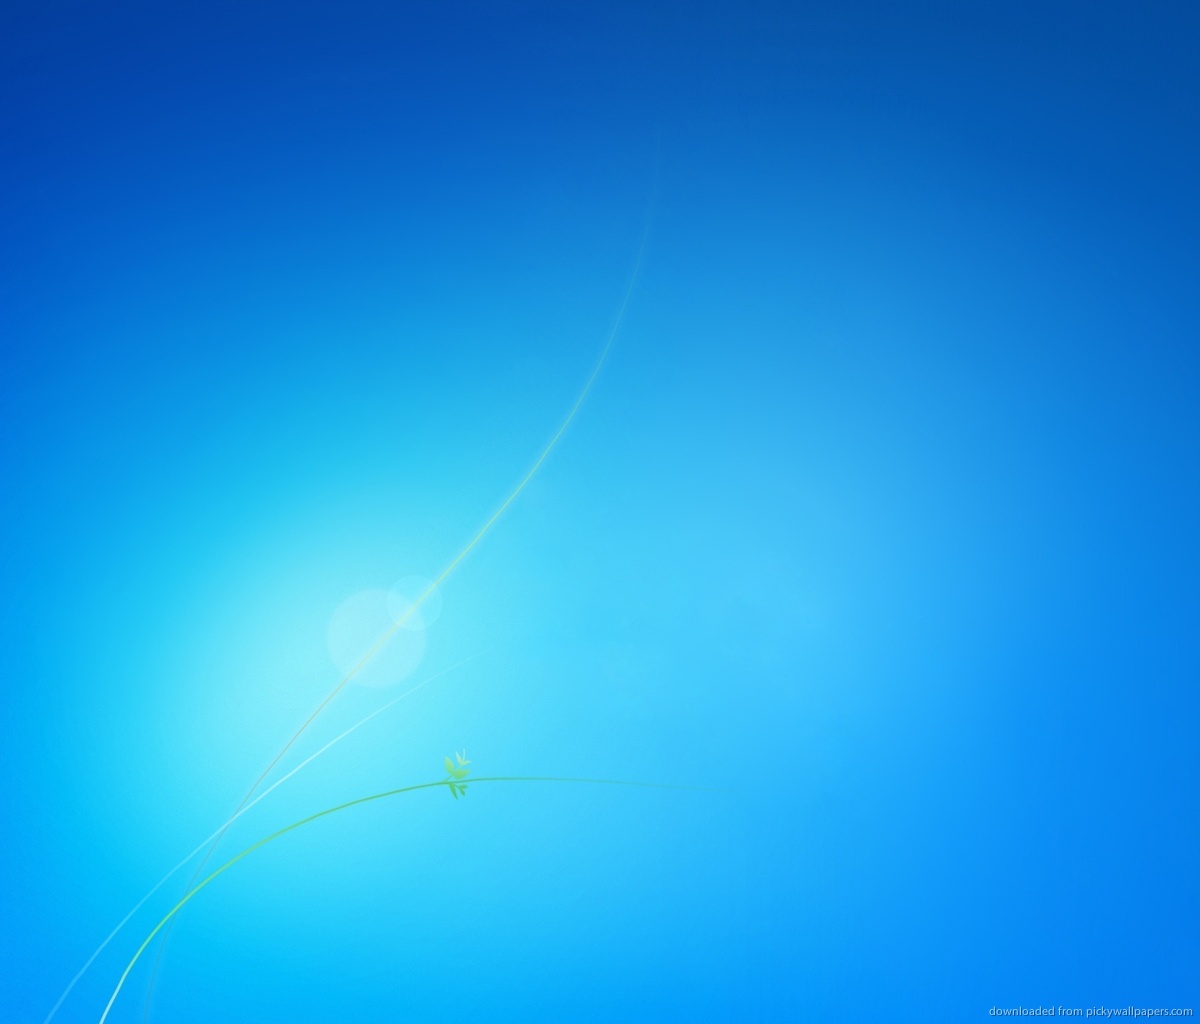 Download Windows 7 Official Wallpaper For Samsung Galaxy Tab